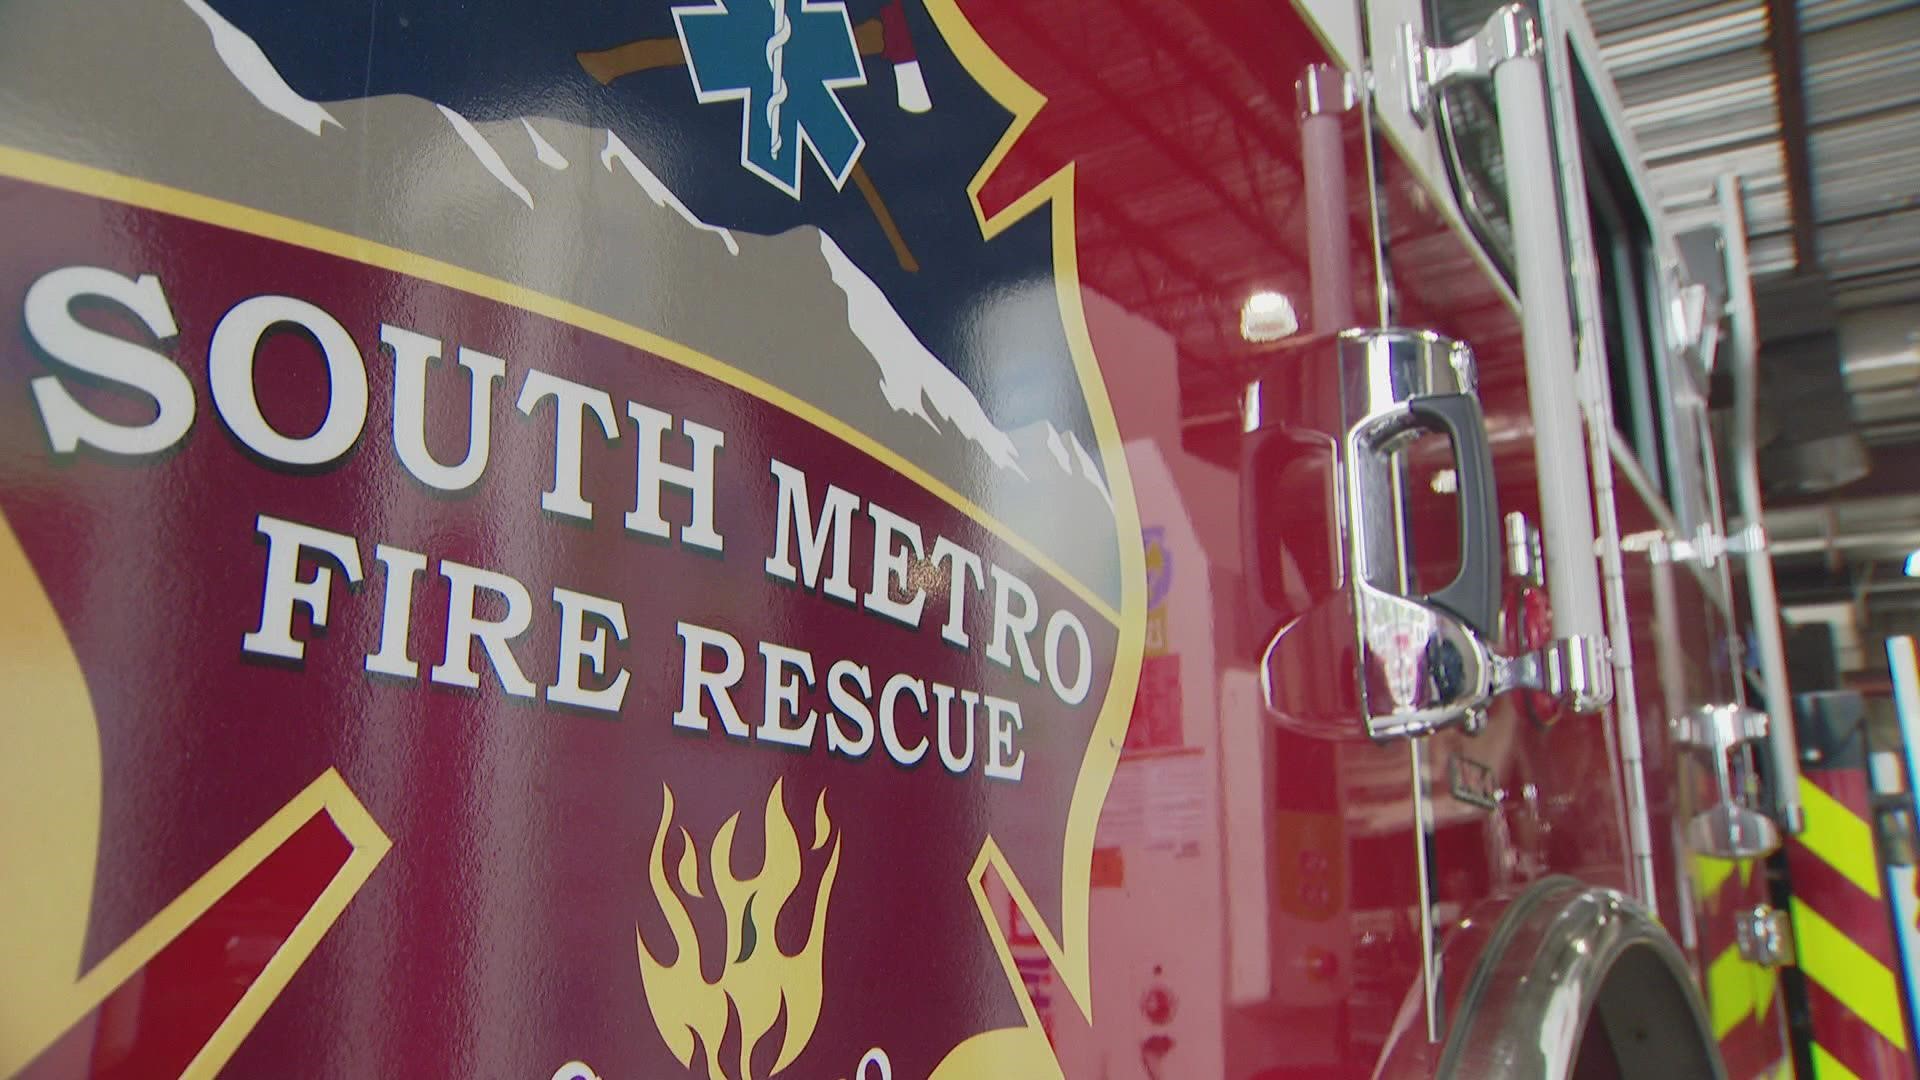 South Metro Fire Rescue hoped to pay in the $700,000 range for fuel this year. Now, it looks like it'll be closer to $1,000,000.